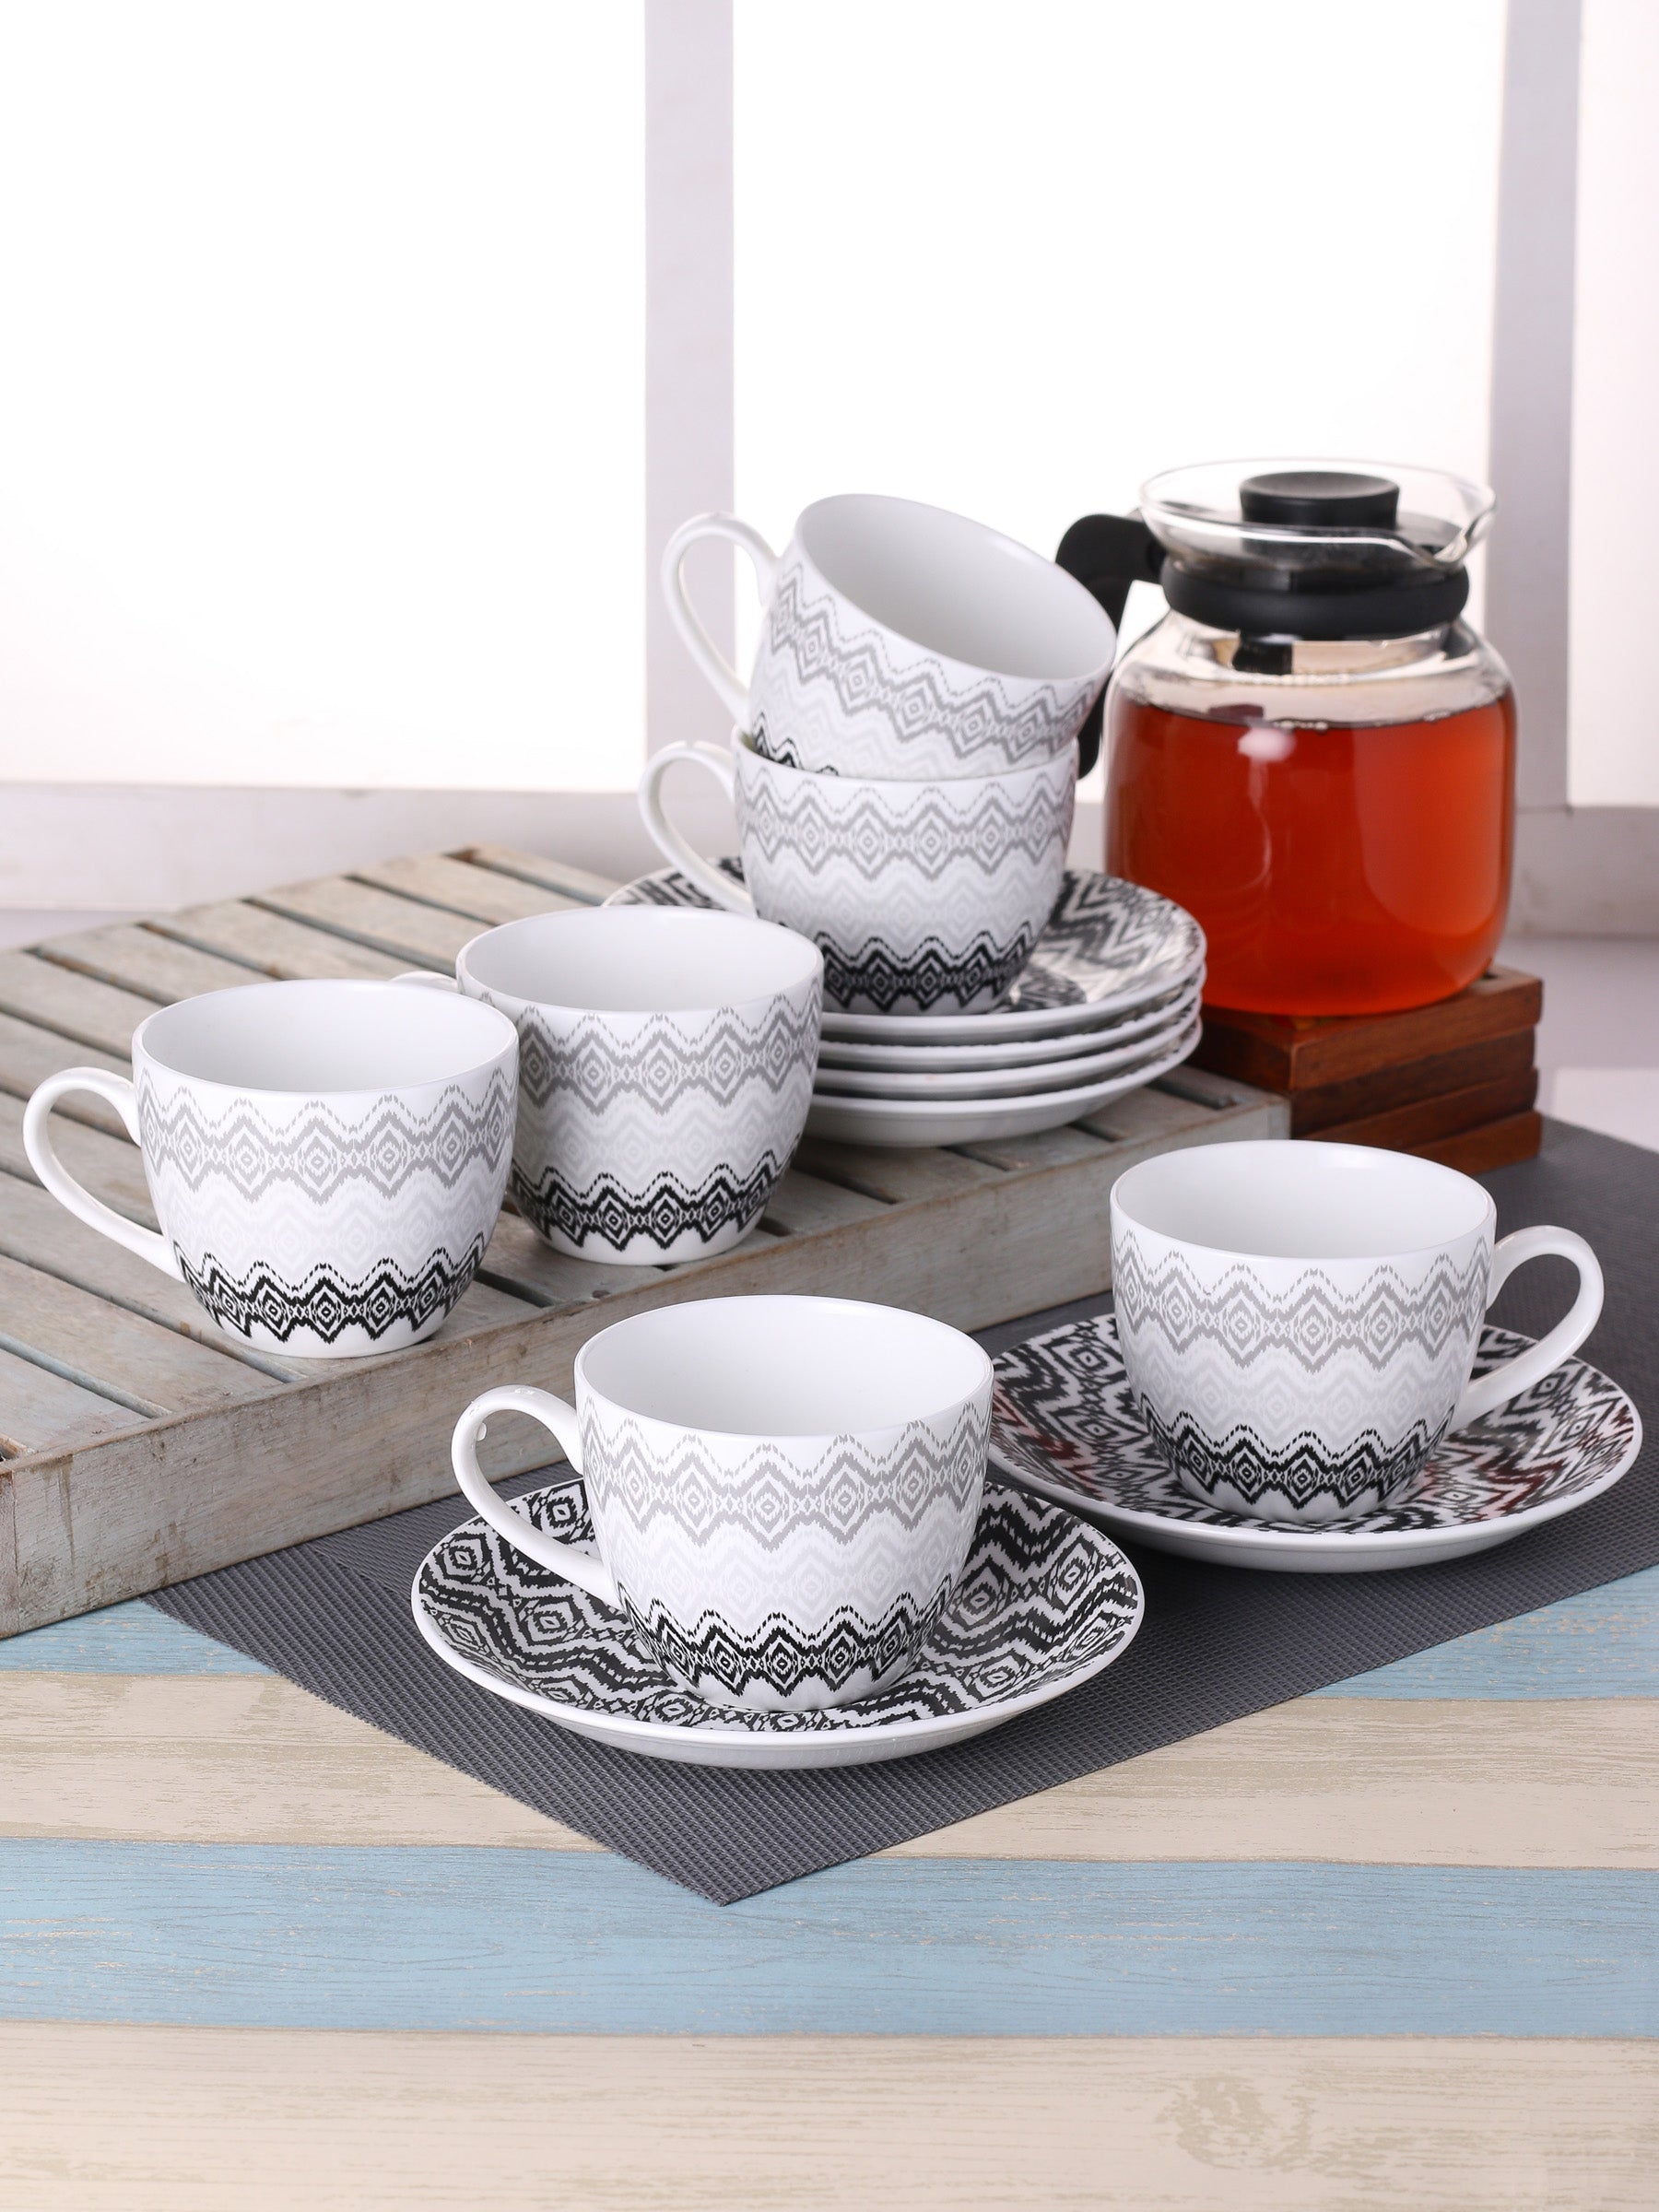 Cream Super Cup & Saucer, 210ml, Sets of 12 (6+6) (S331) - Clay Craft India